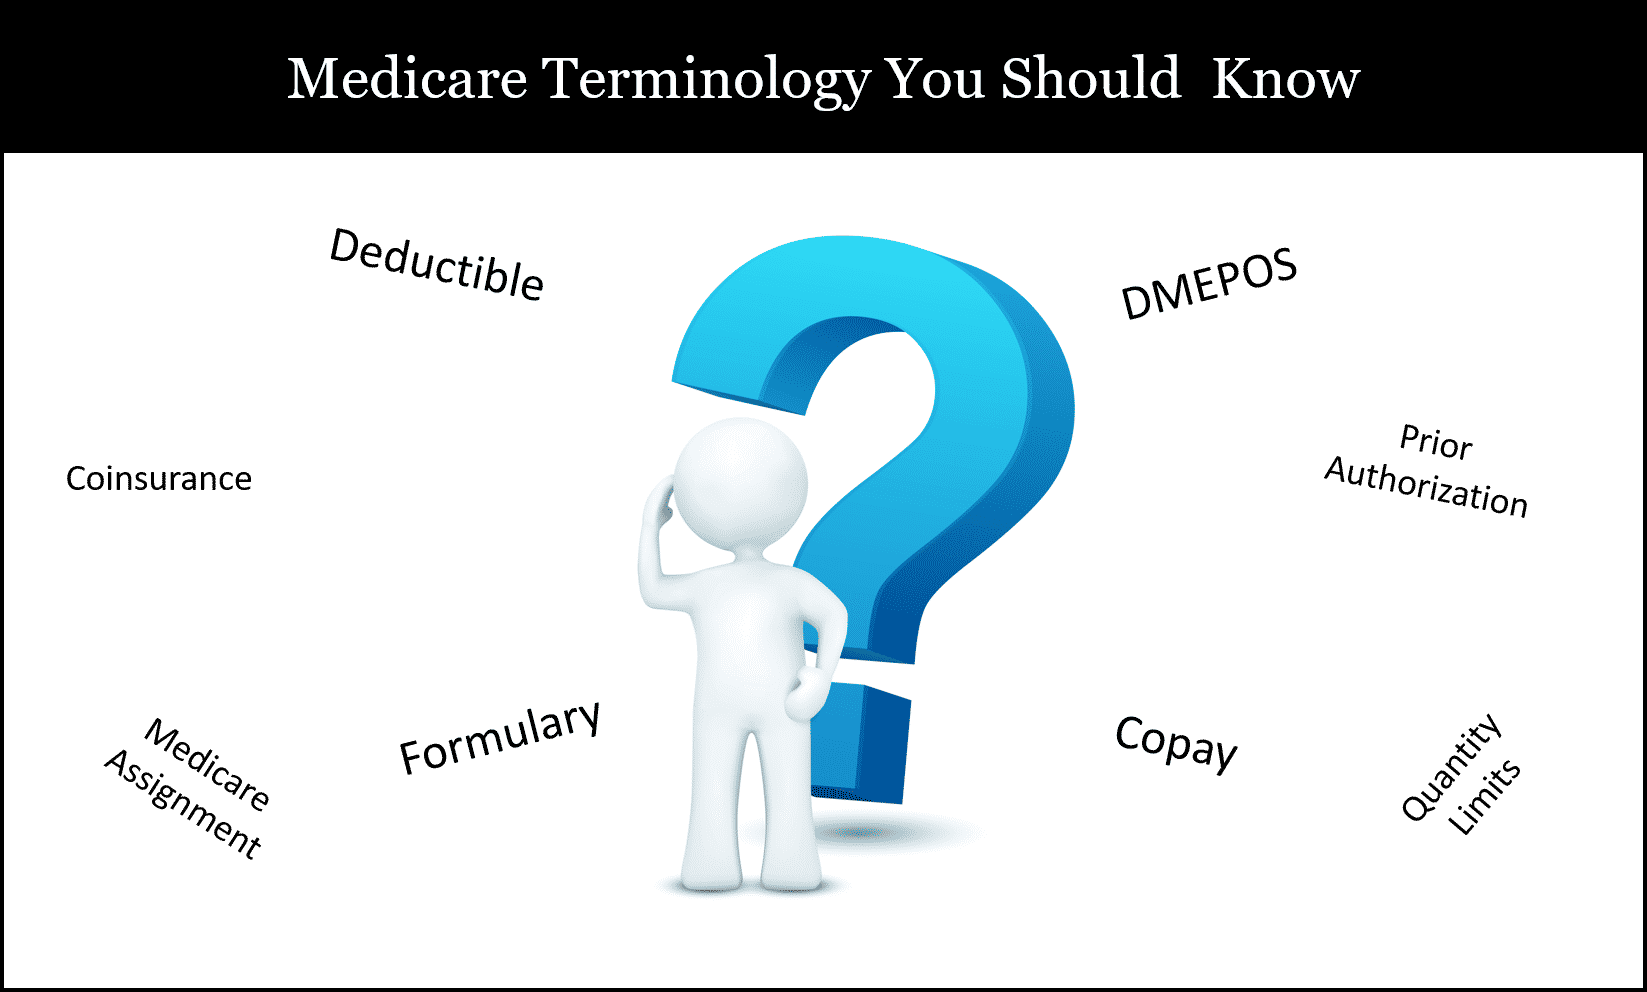 Medicare Terminology You Should Know